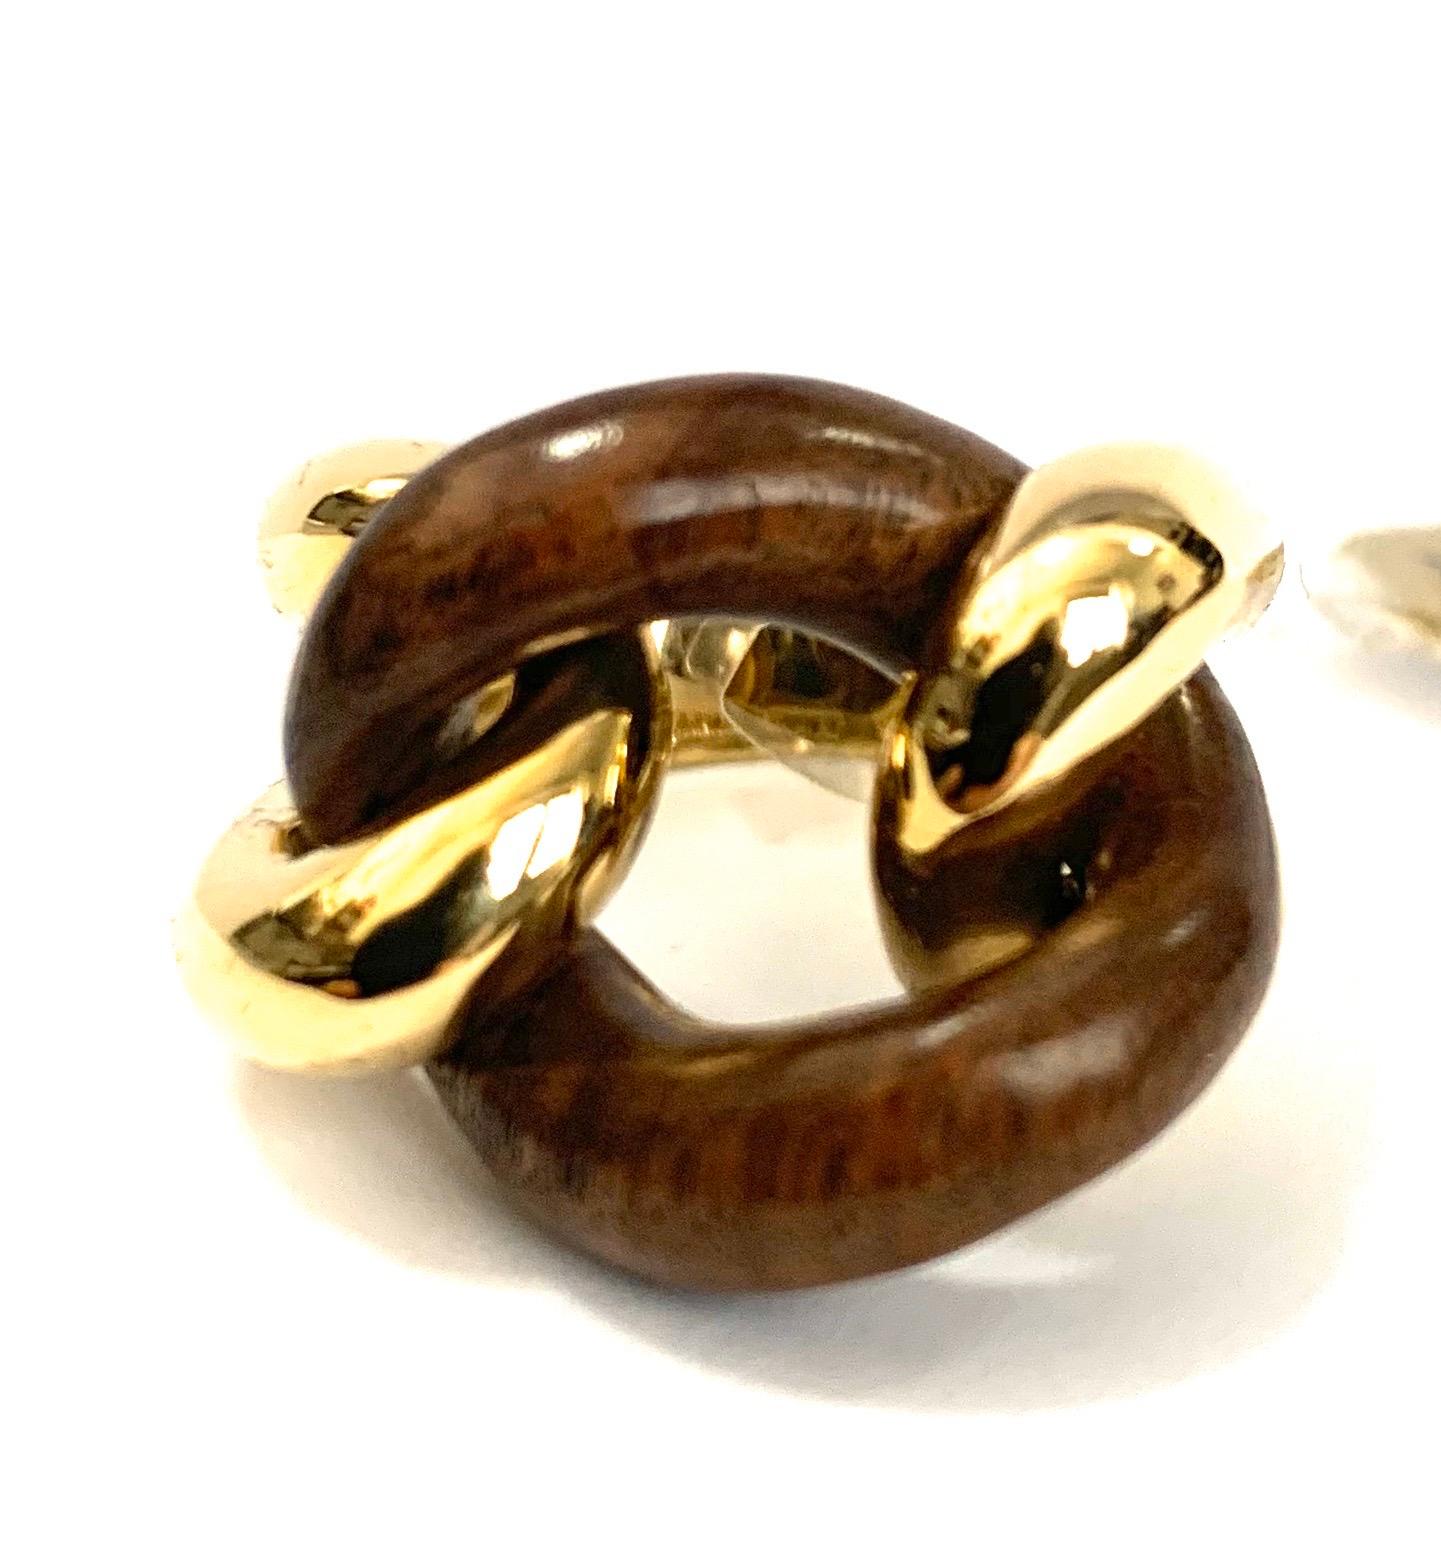 Rose wood groumette ring in 18 kt yellow gold
The rose wood is the most resistant wood and even the most precious.
This iconic collection in Micheletto tradition was originally made only in gold just more or less 10 years ago it became very popular